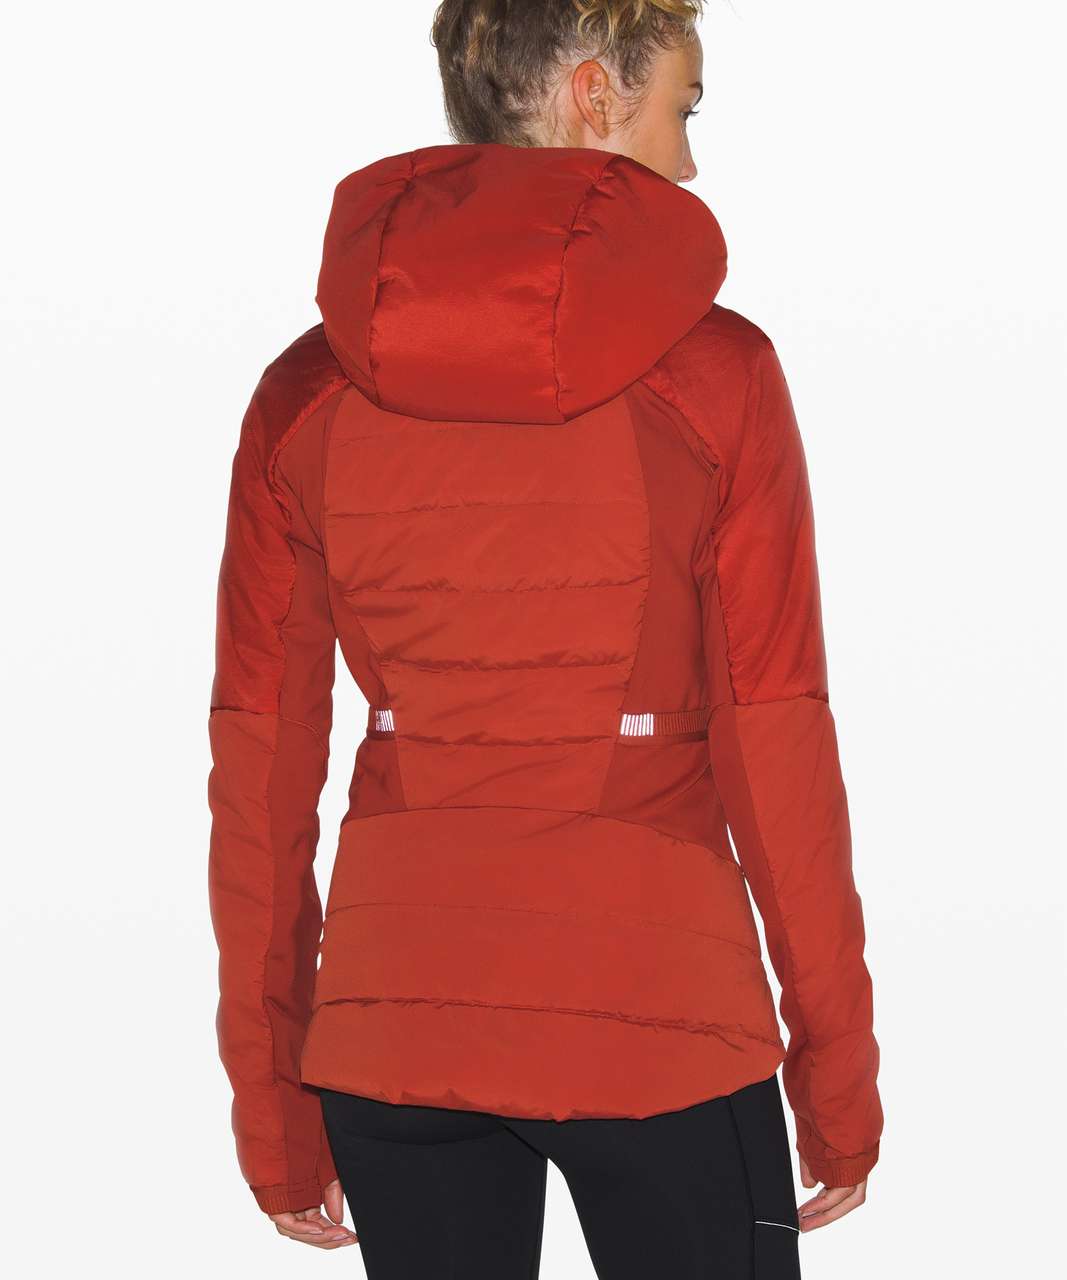 NWT Lululemon Down For It All Down Jacket 700 Fill Sz 6